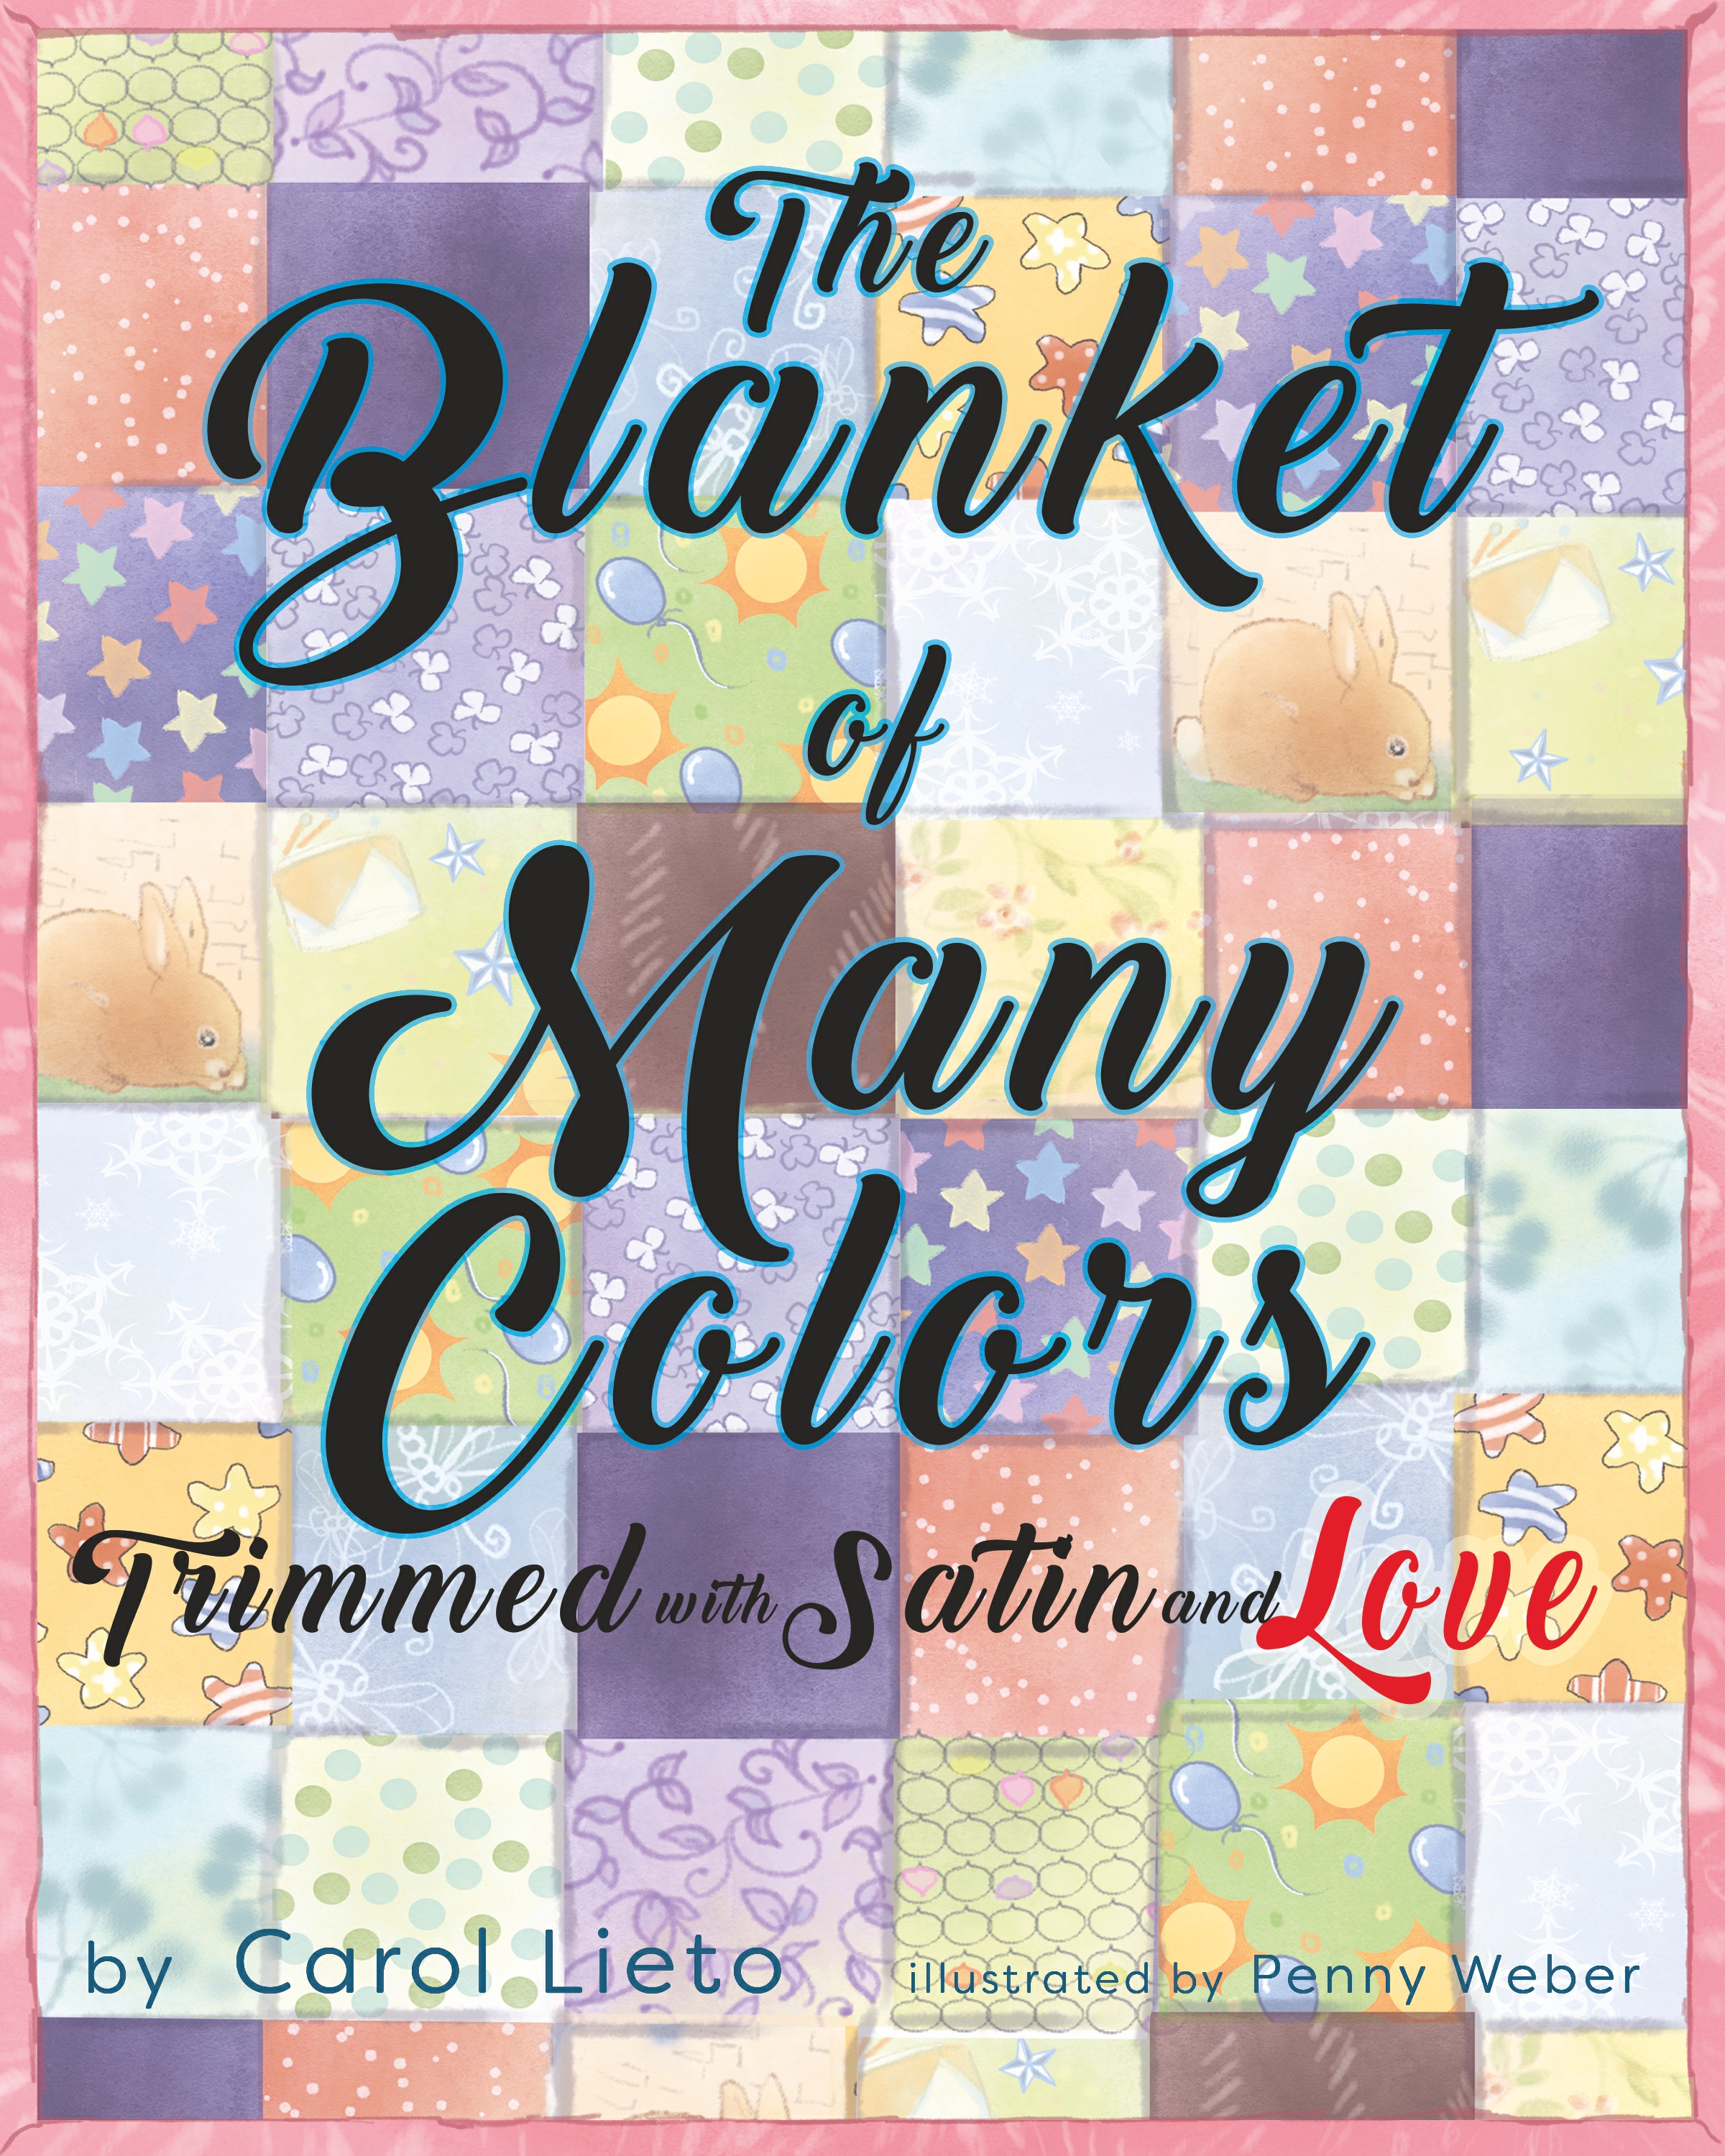 Blanket of Many Colors finishes with text revised 3